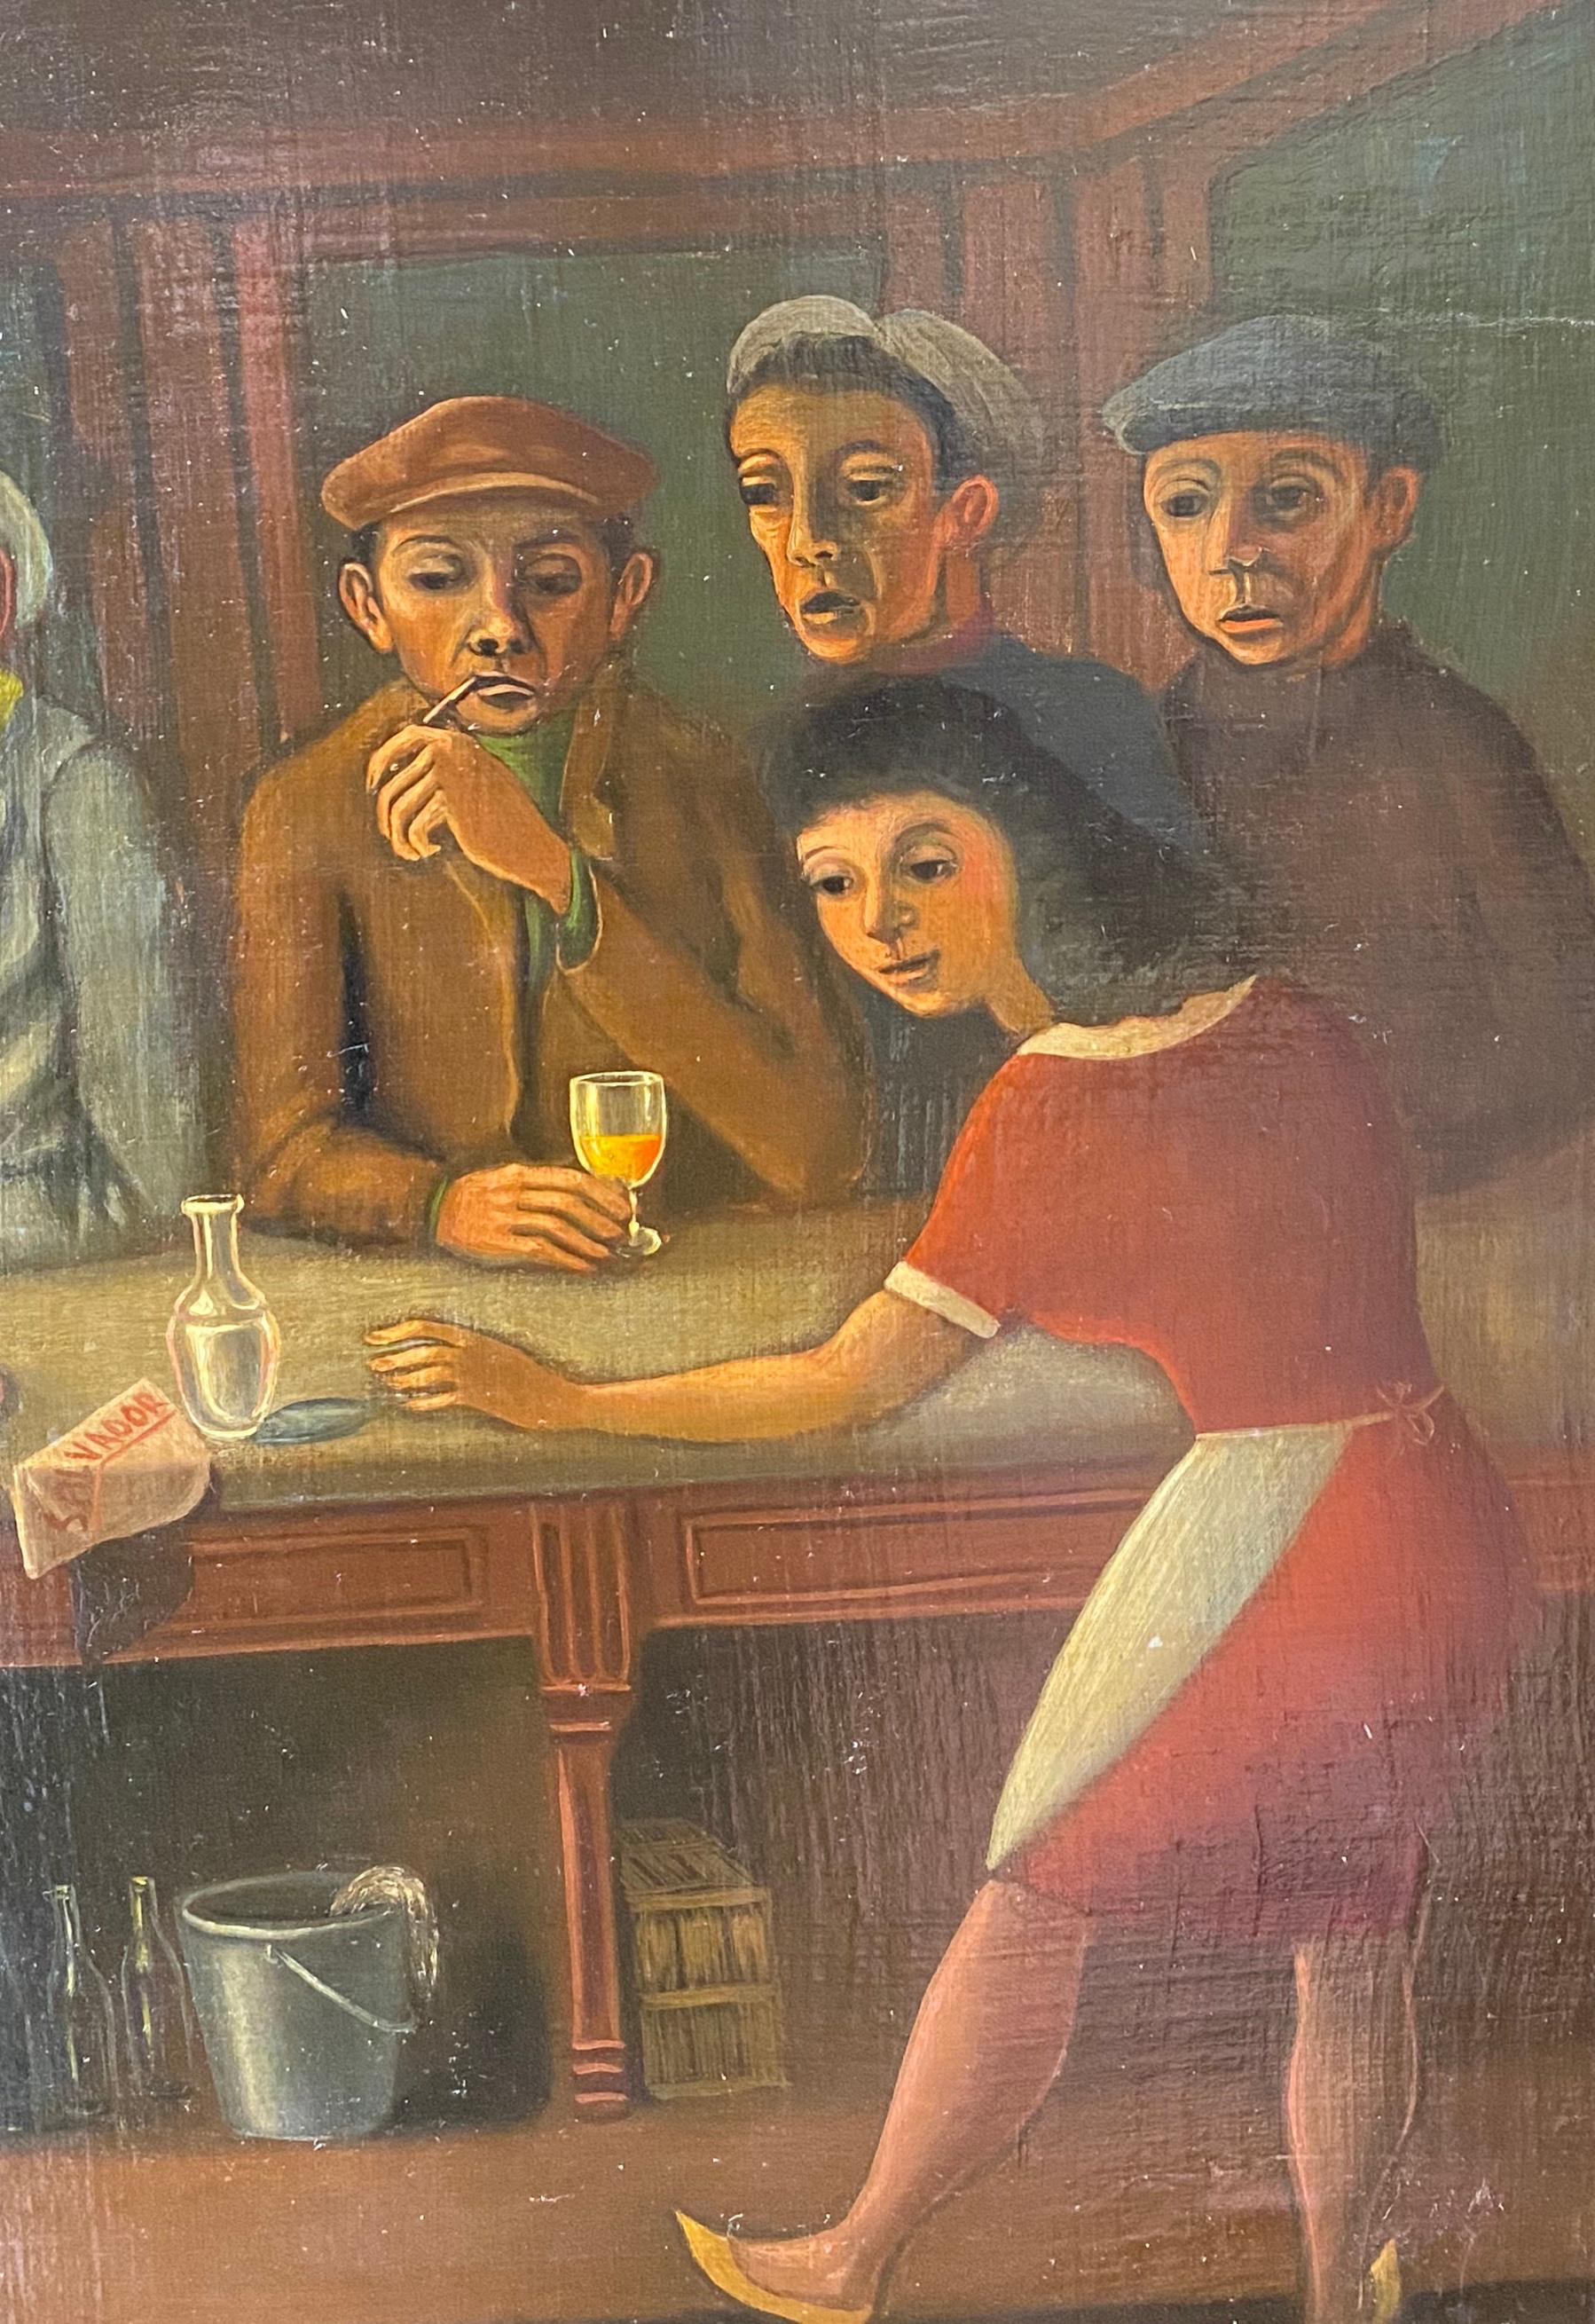 The bar: prohibition speakeasy era faux naif surrealist outsider painting 1